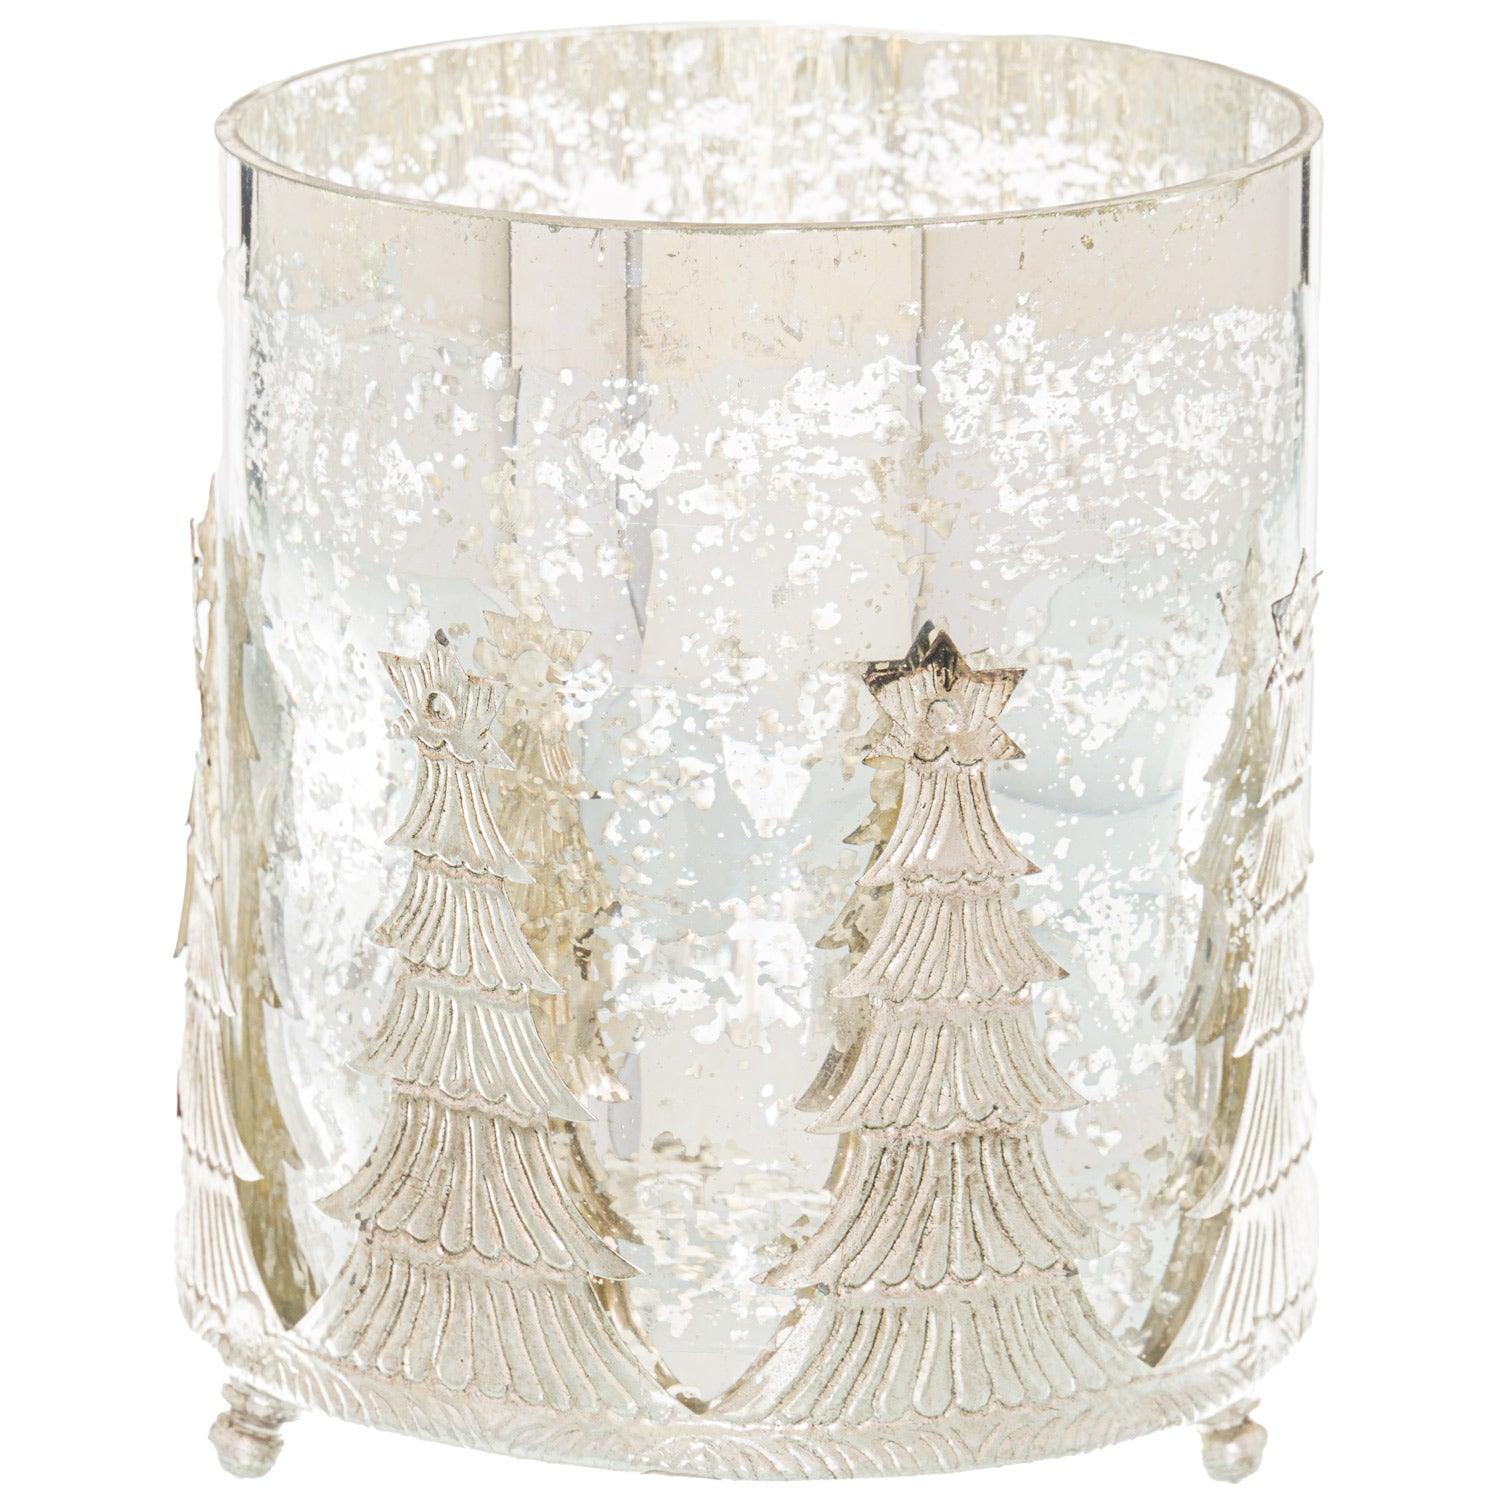 View The Noel Collection Christmas Tree Candle Holder information